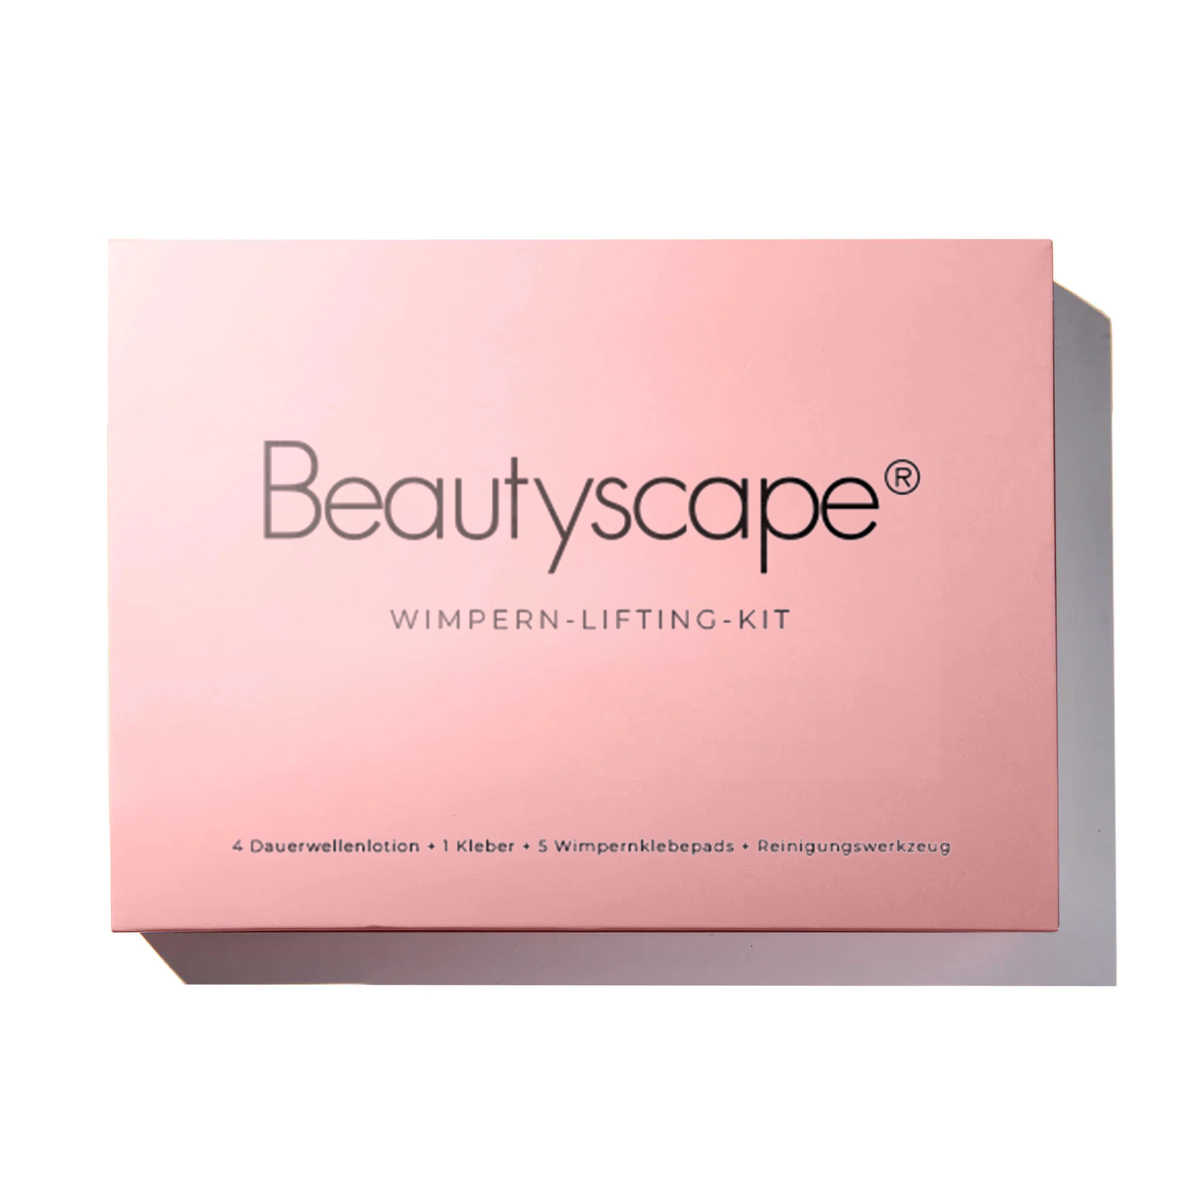 BEAUTYSCAPE® Wimpern-Lifting-Kit